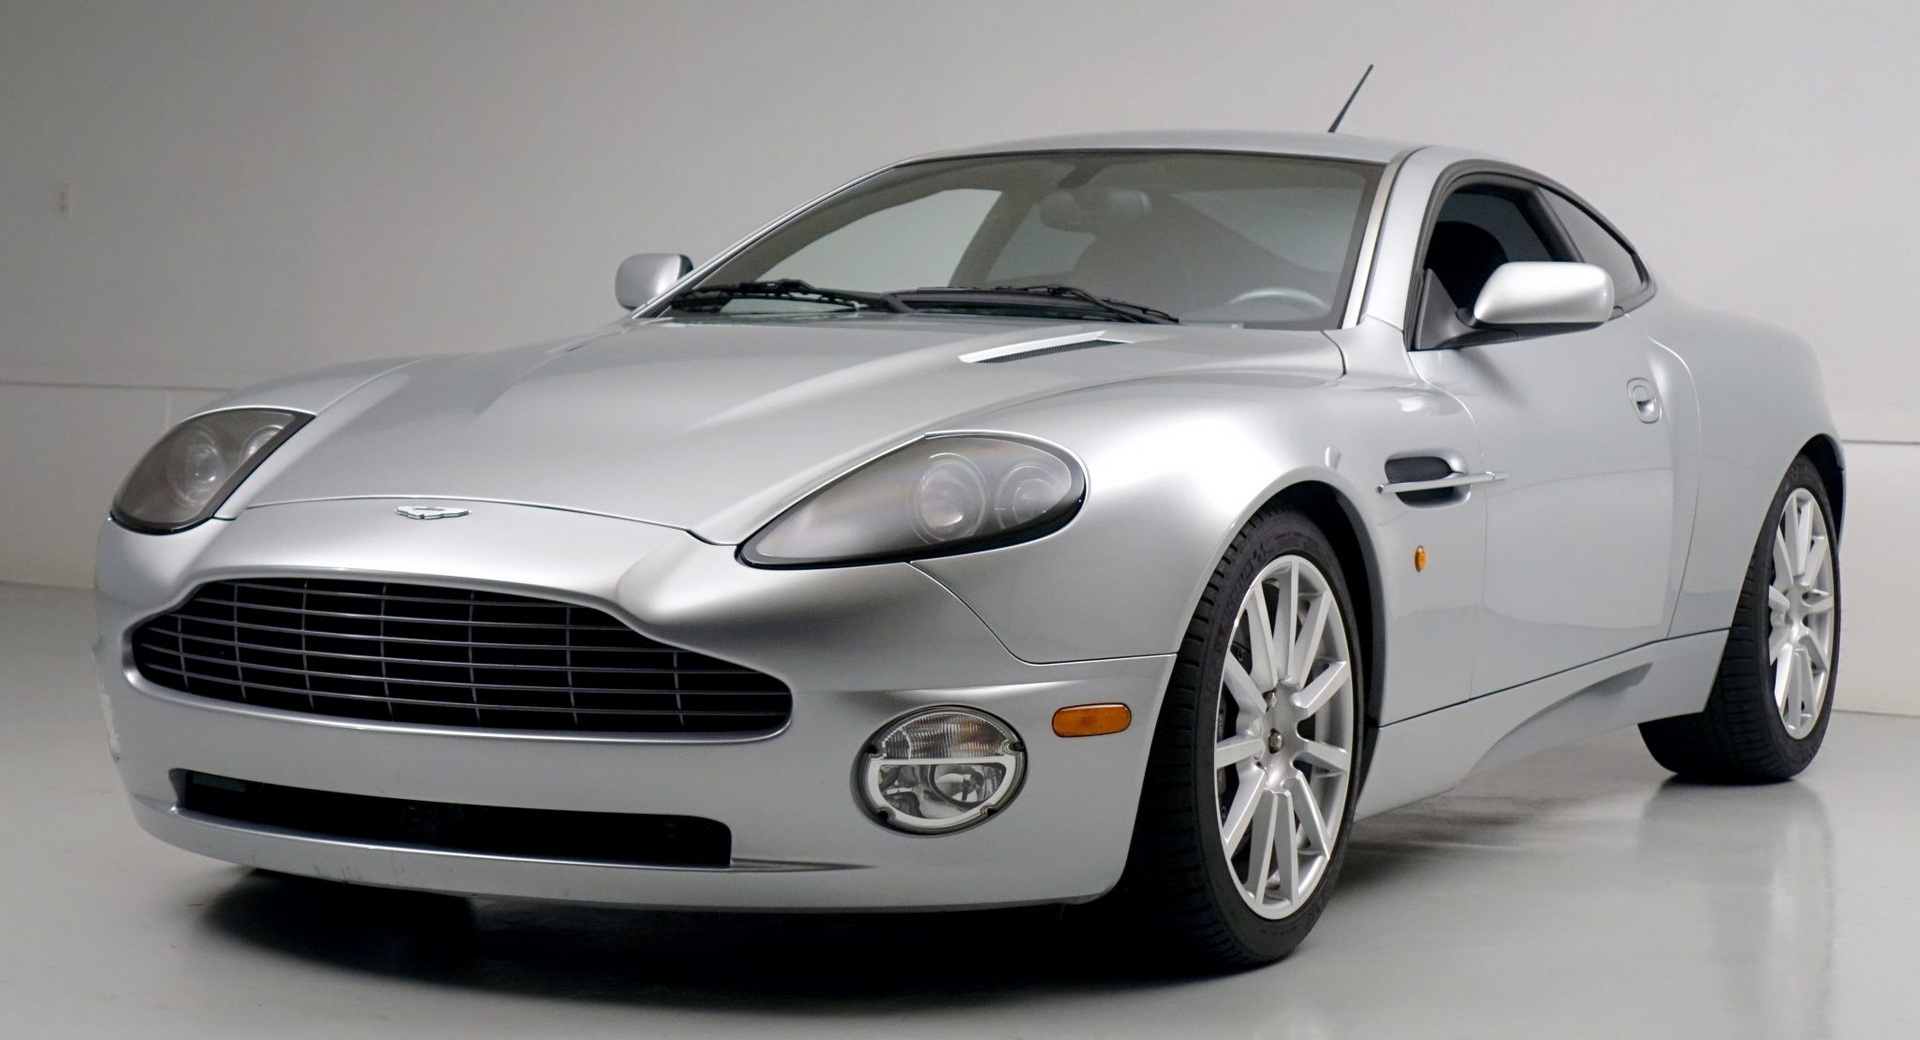 2006 Aston Martin Vanquish S With 23K Miles Once Belonged To Megadeth's  Frontman | Carscoops